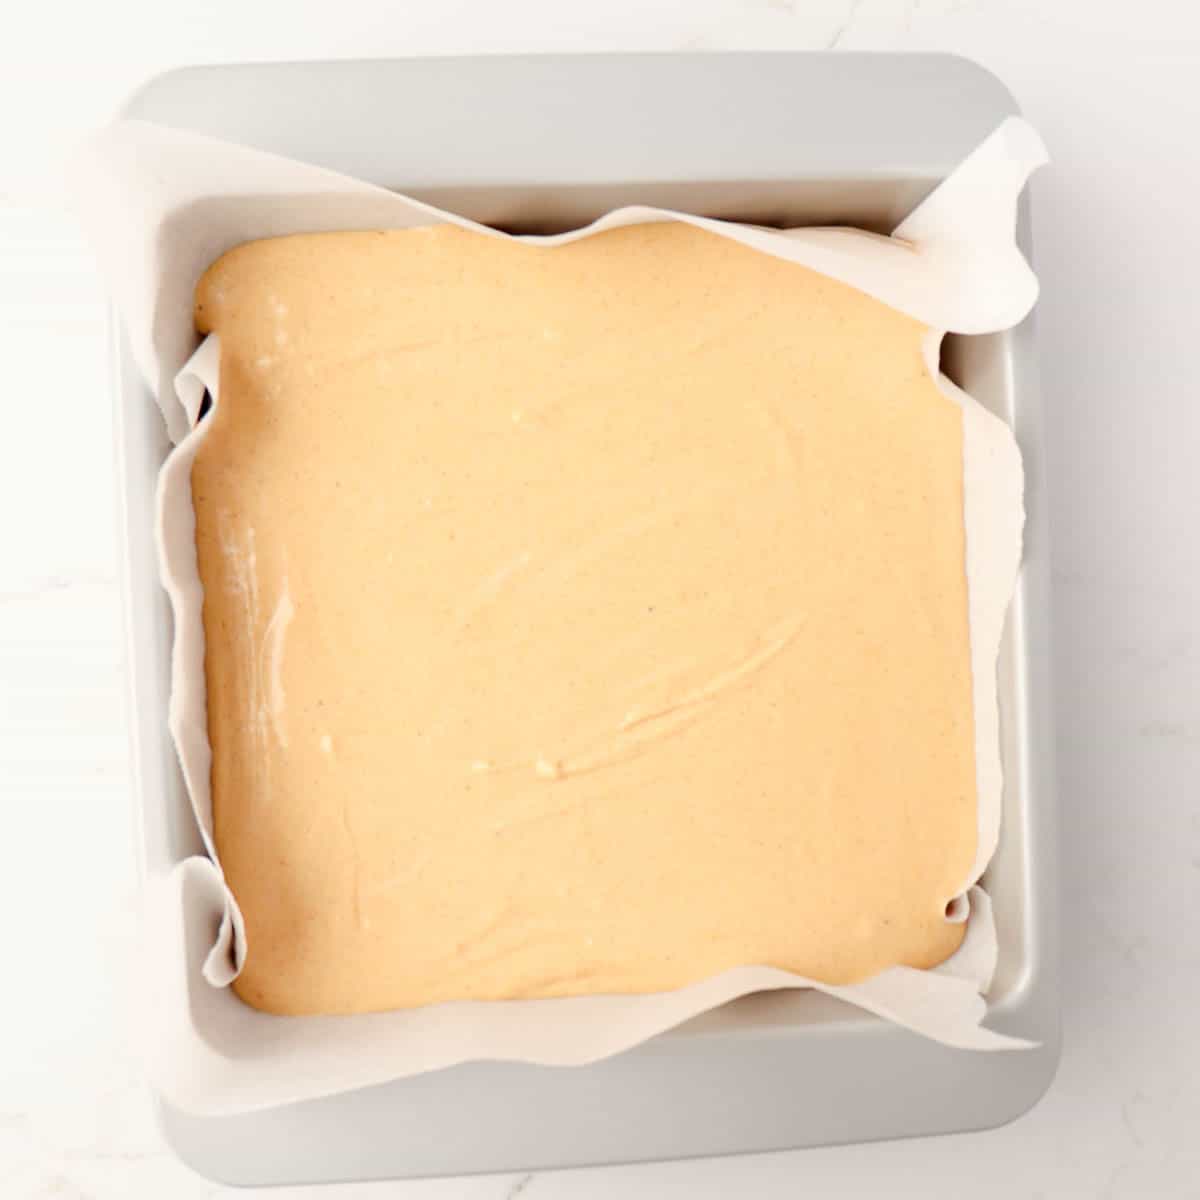 Cheesecake batter in a metal pan lined with parchment paper on top of the gingersnap crust.